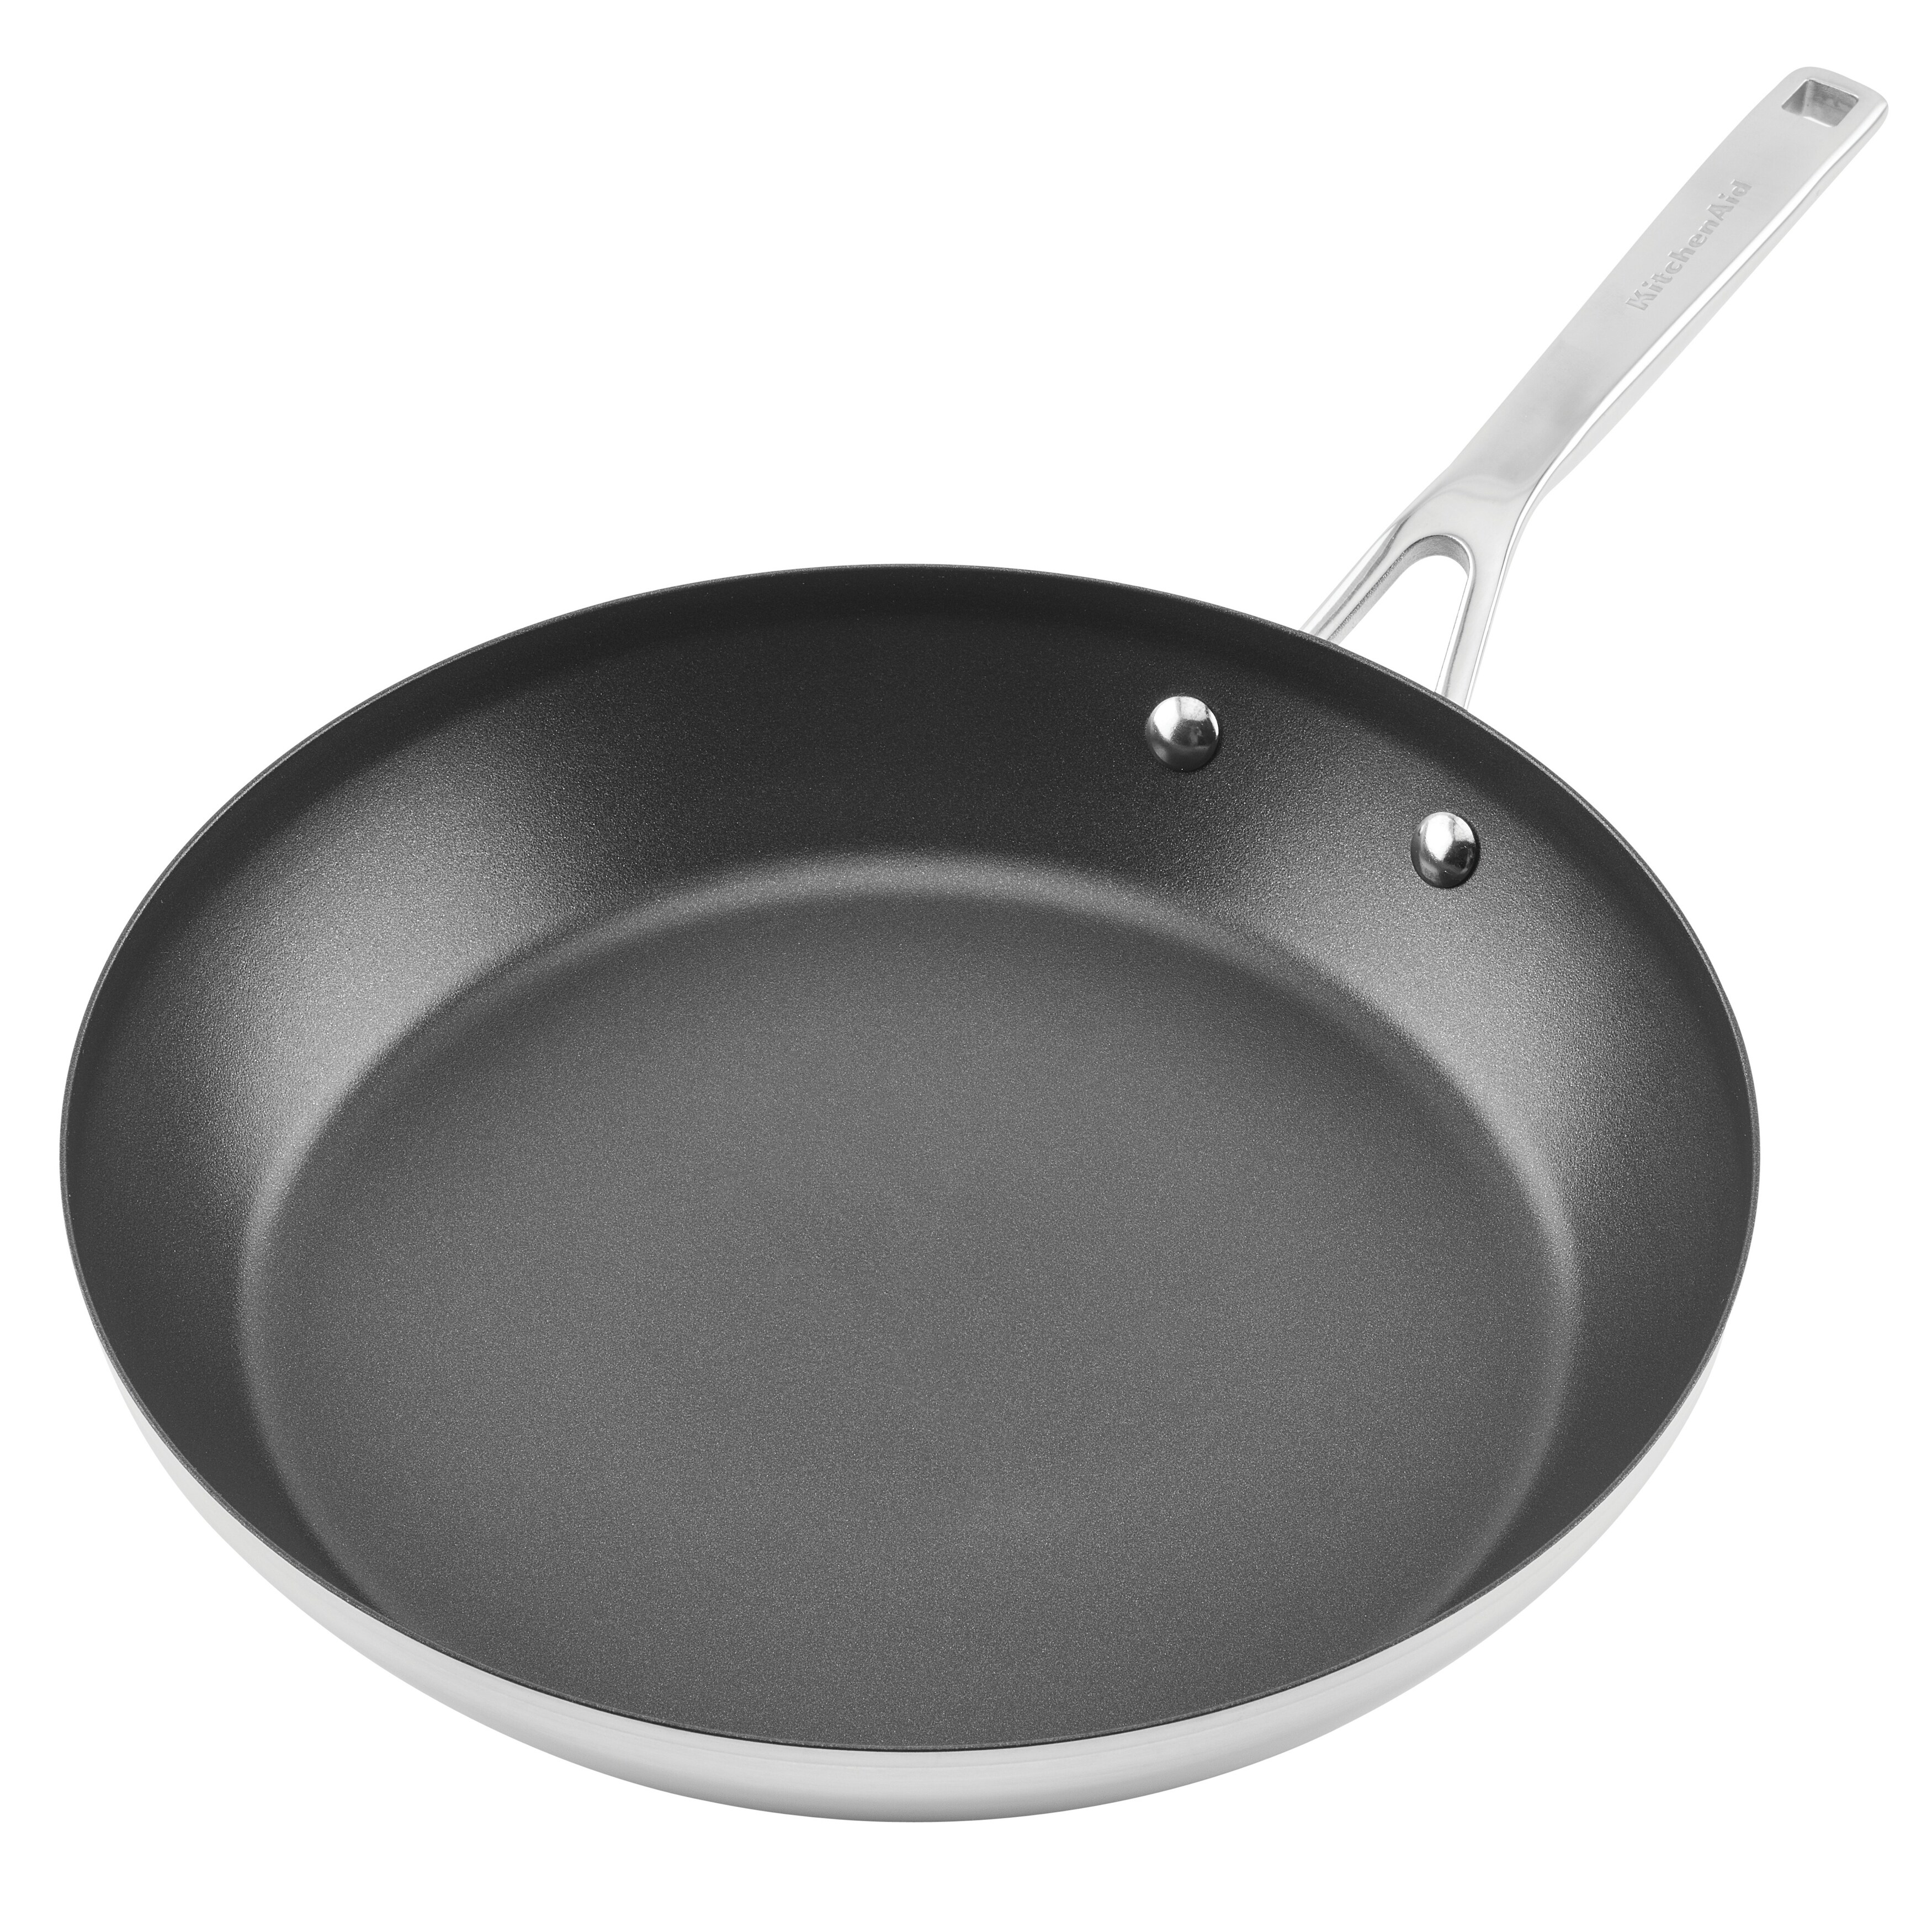 https://ak1.ostkcdn.com/images/products/is/images/direct/a67620cd2f6436b5455a0fbd495146259831ad73/KitchenAid-3-Ply-Base-Stainless-Steel-Nonstick-Induction-Frying-Pan%2C-12-Inch%2C-Brushed-Stainless-Steel.jpg